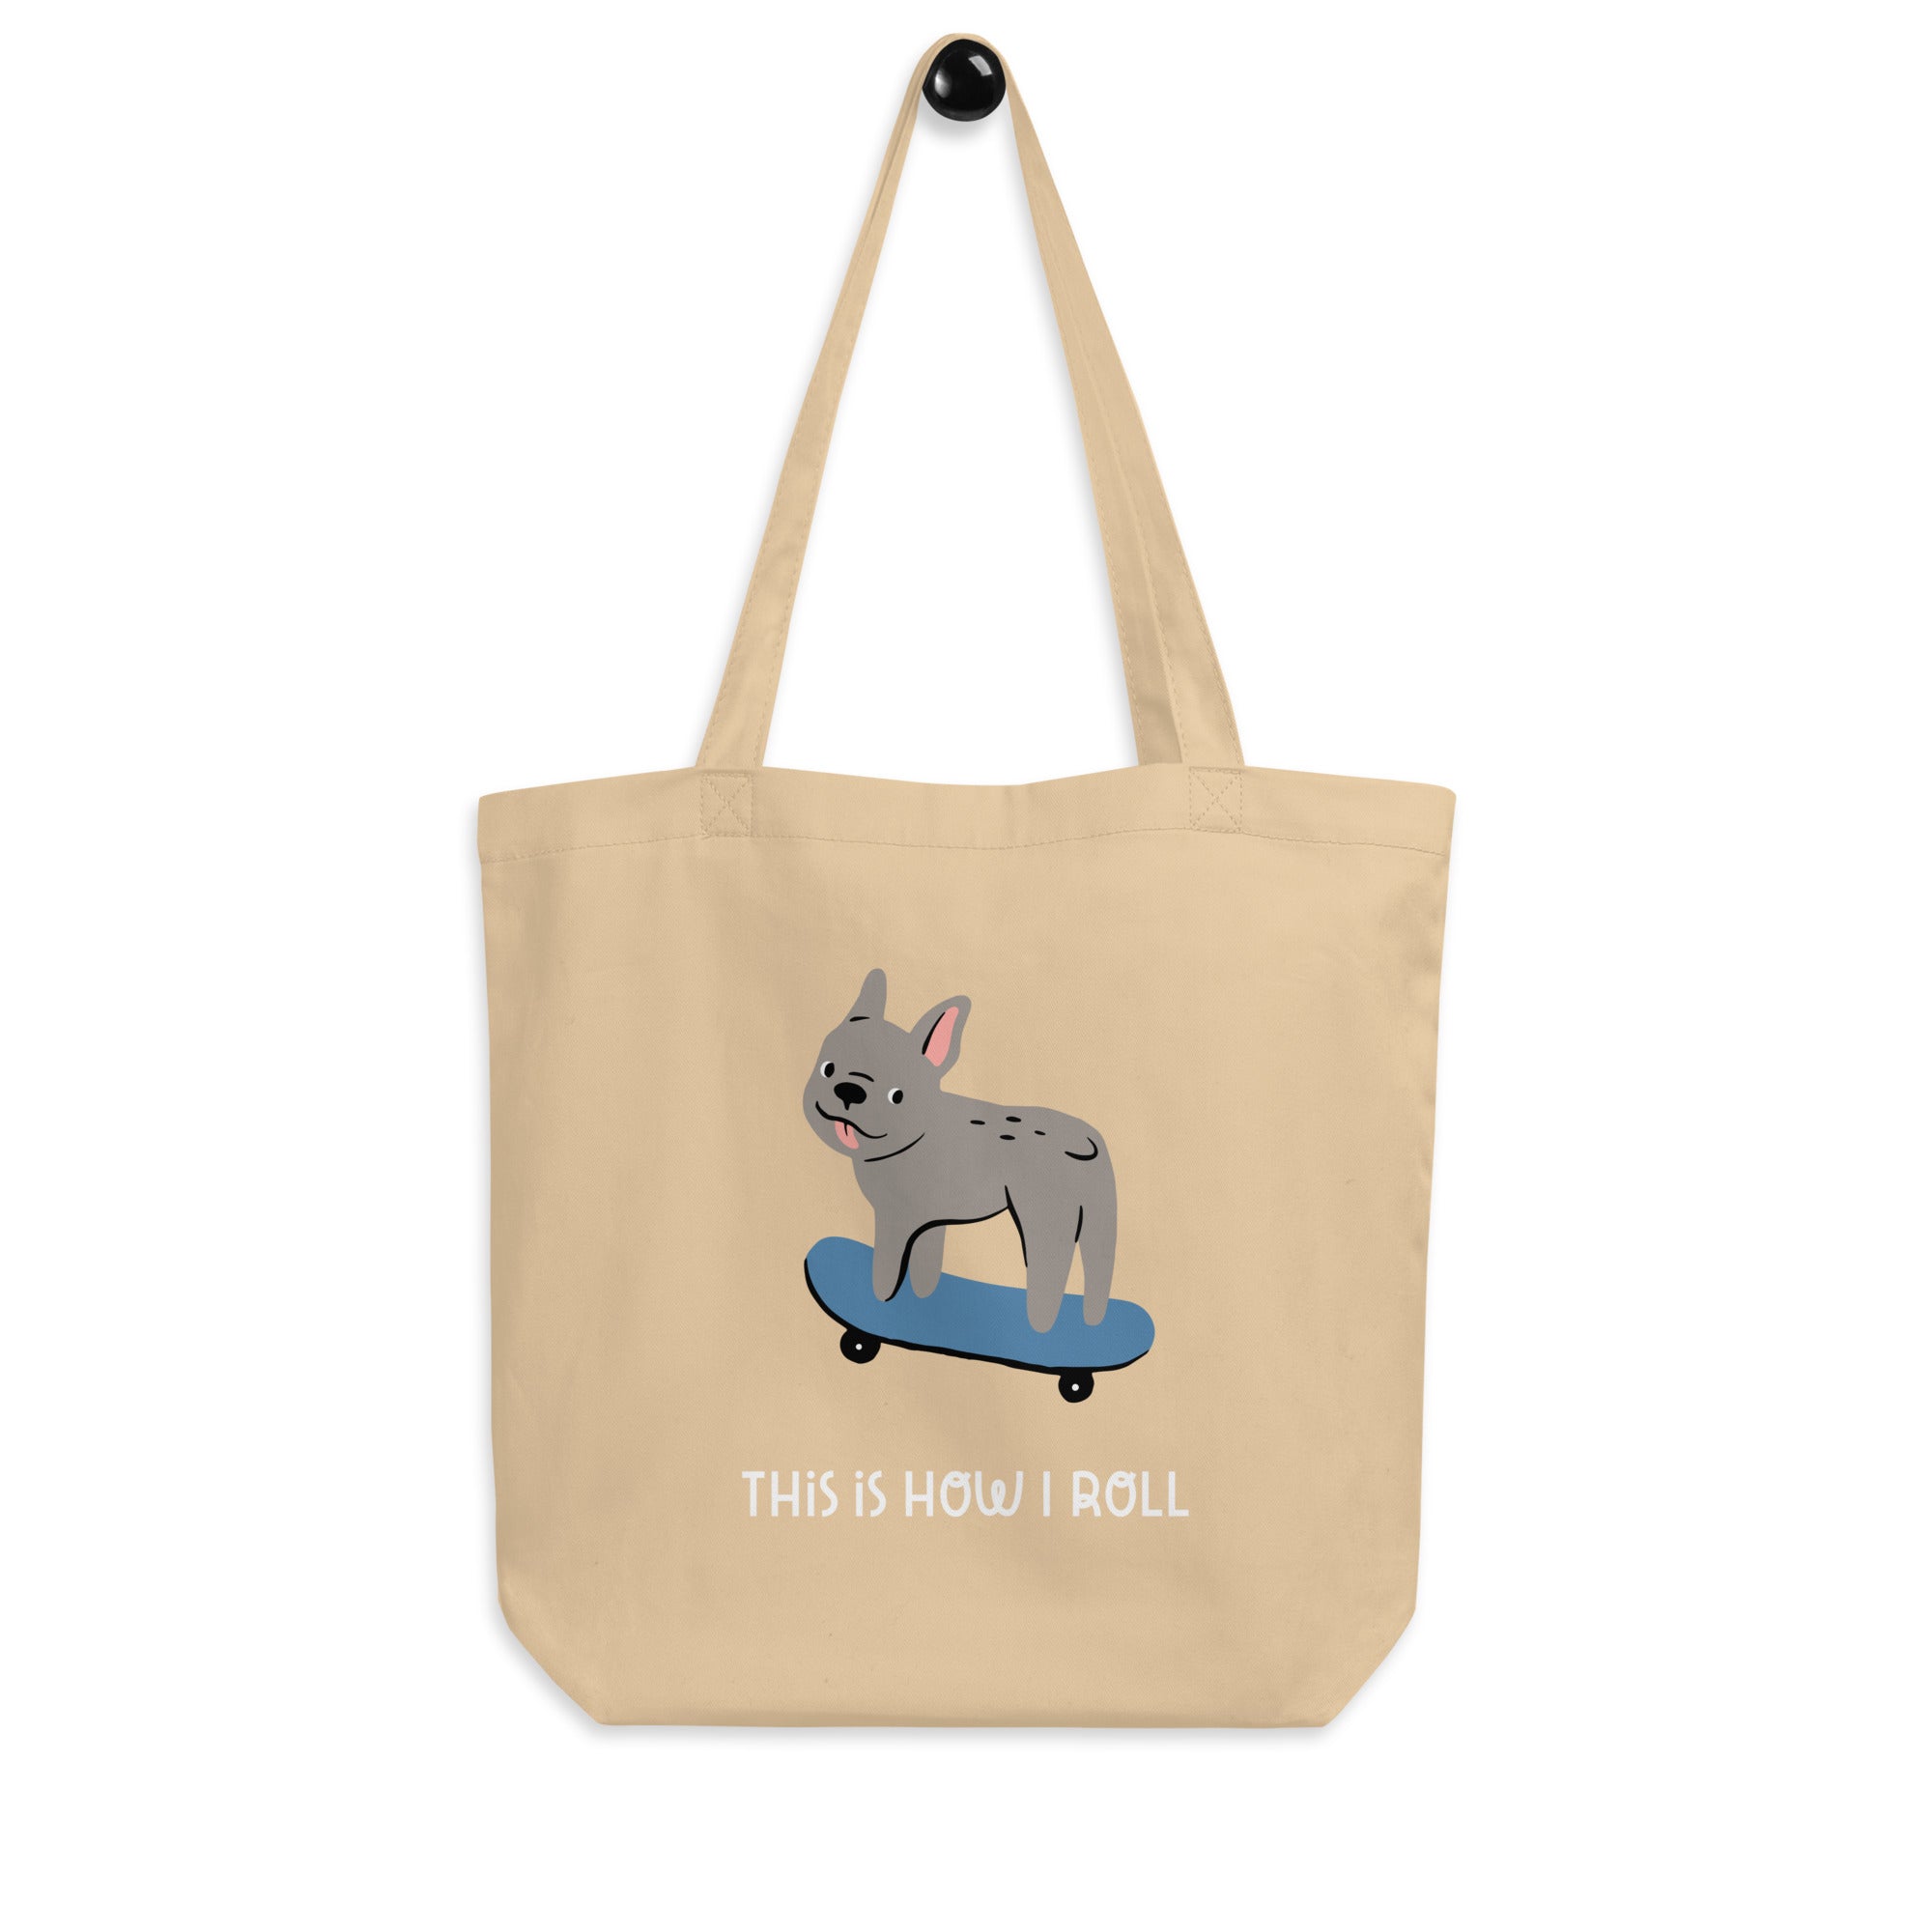 This is how I roll - Skateboard Frenchie design Eco Tote Bag